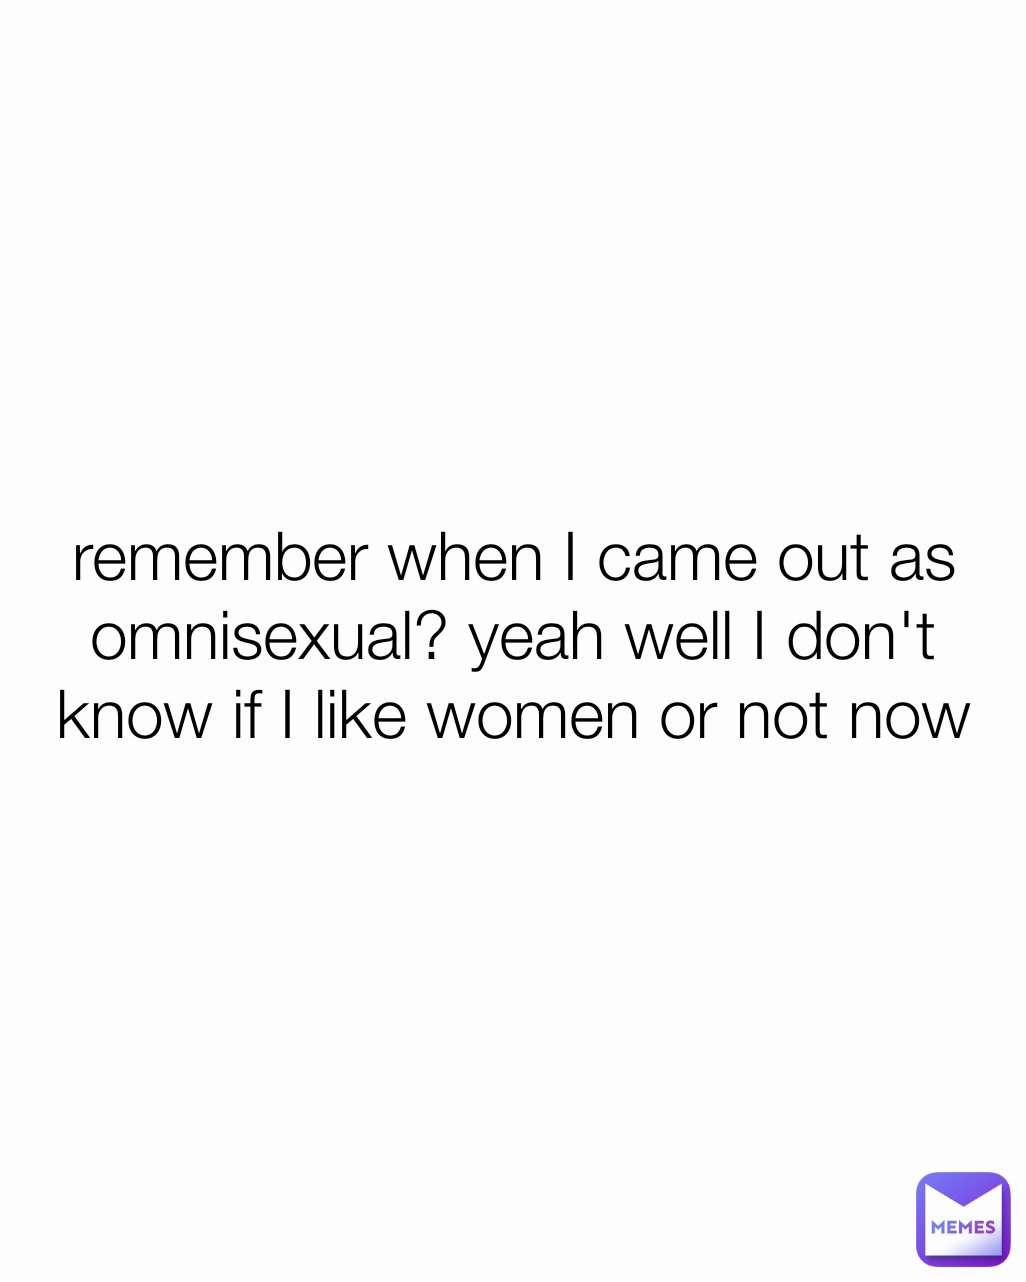 remember when I came out as omnisexual? yeah well I don't know if I like women or not now so idk. help